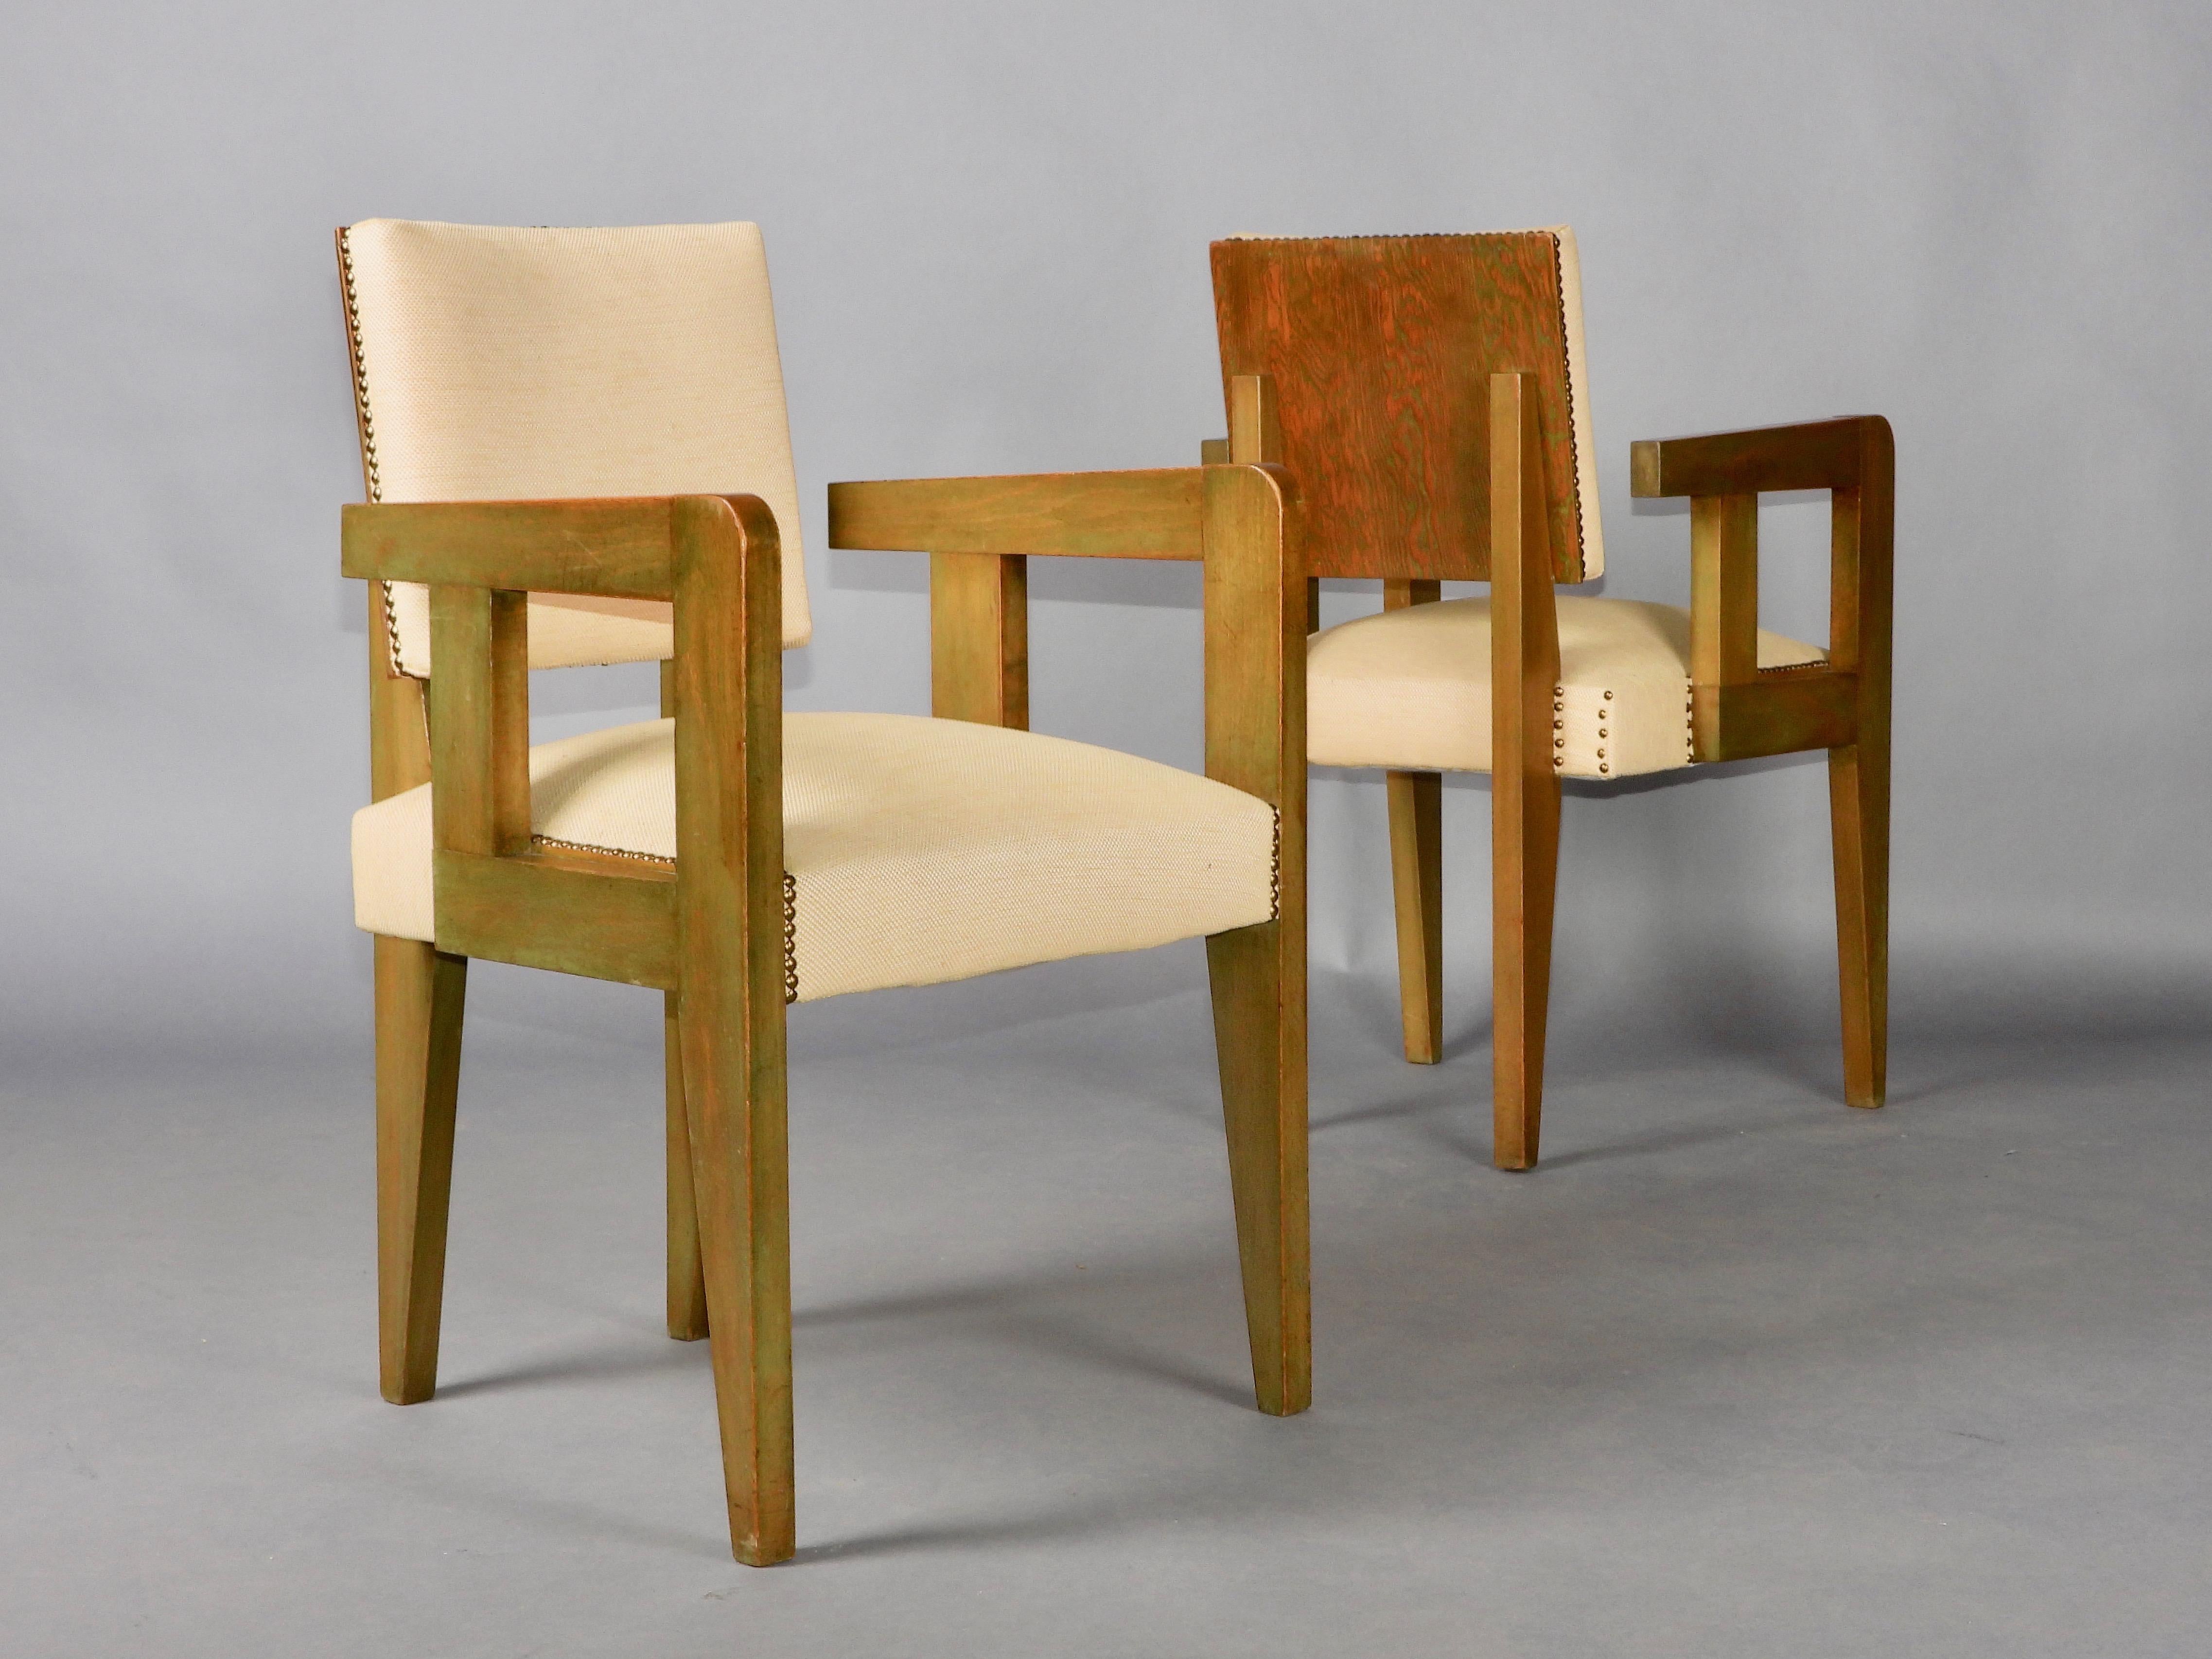 Pair of bridge chairs stained Oregon pine on the back side , lacquer olive green color wood, brass nail-heads and fabric upholstery, each underside stamped 'BREVETE SORNAY/FRANCE ETRANGER